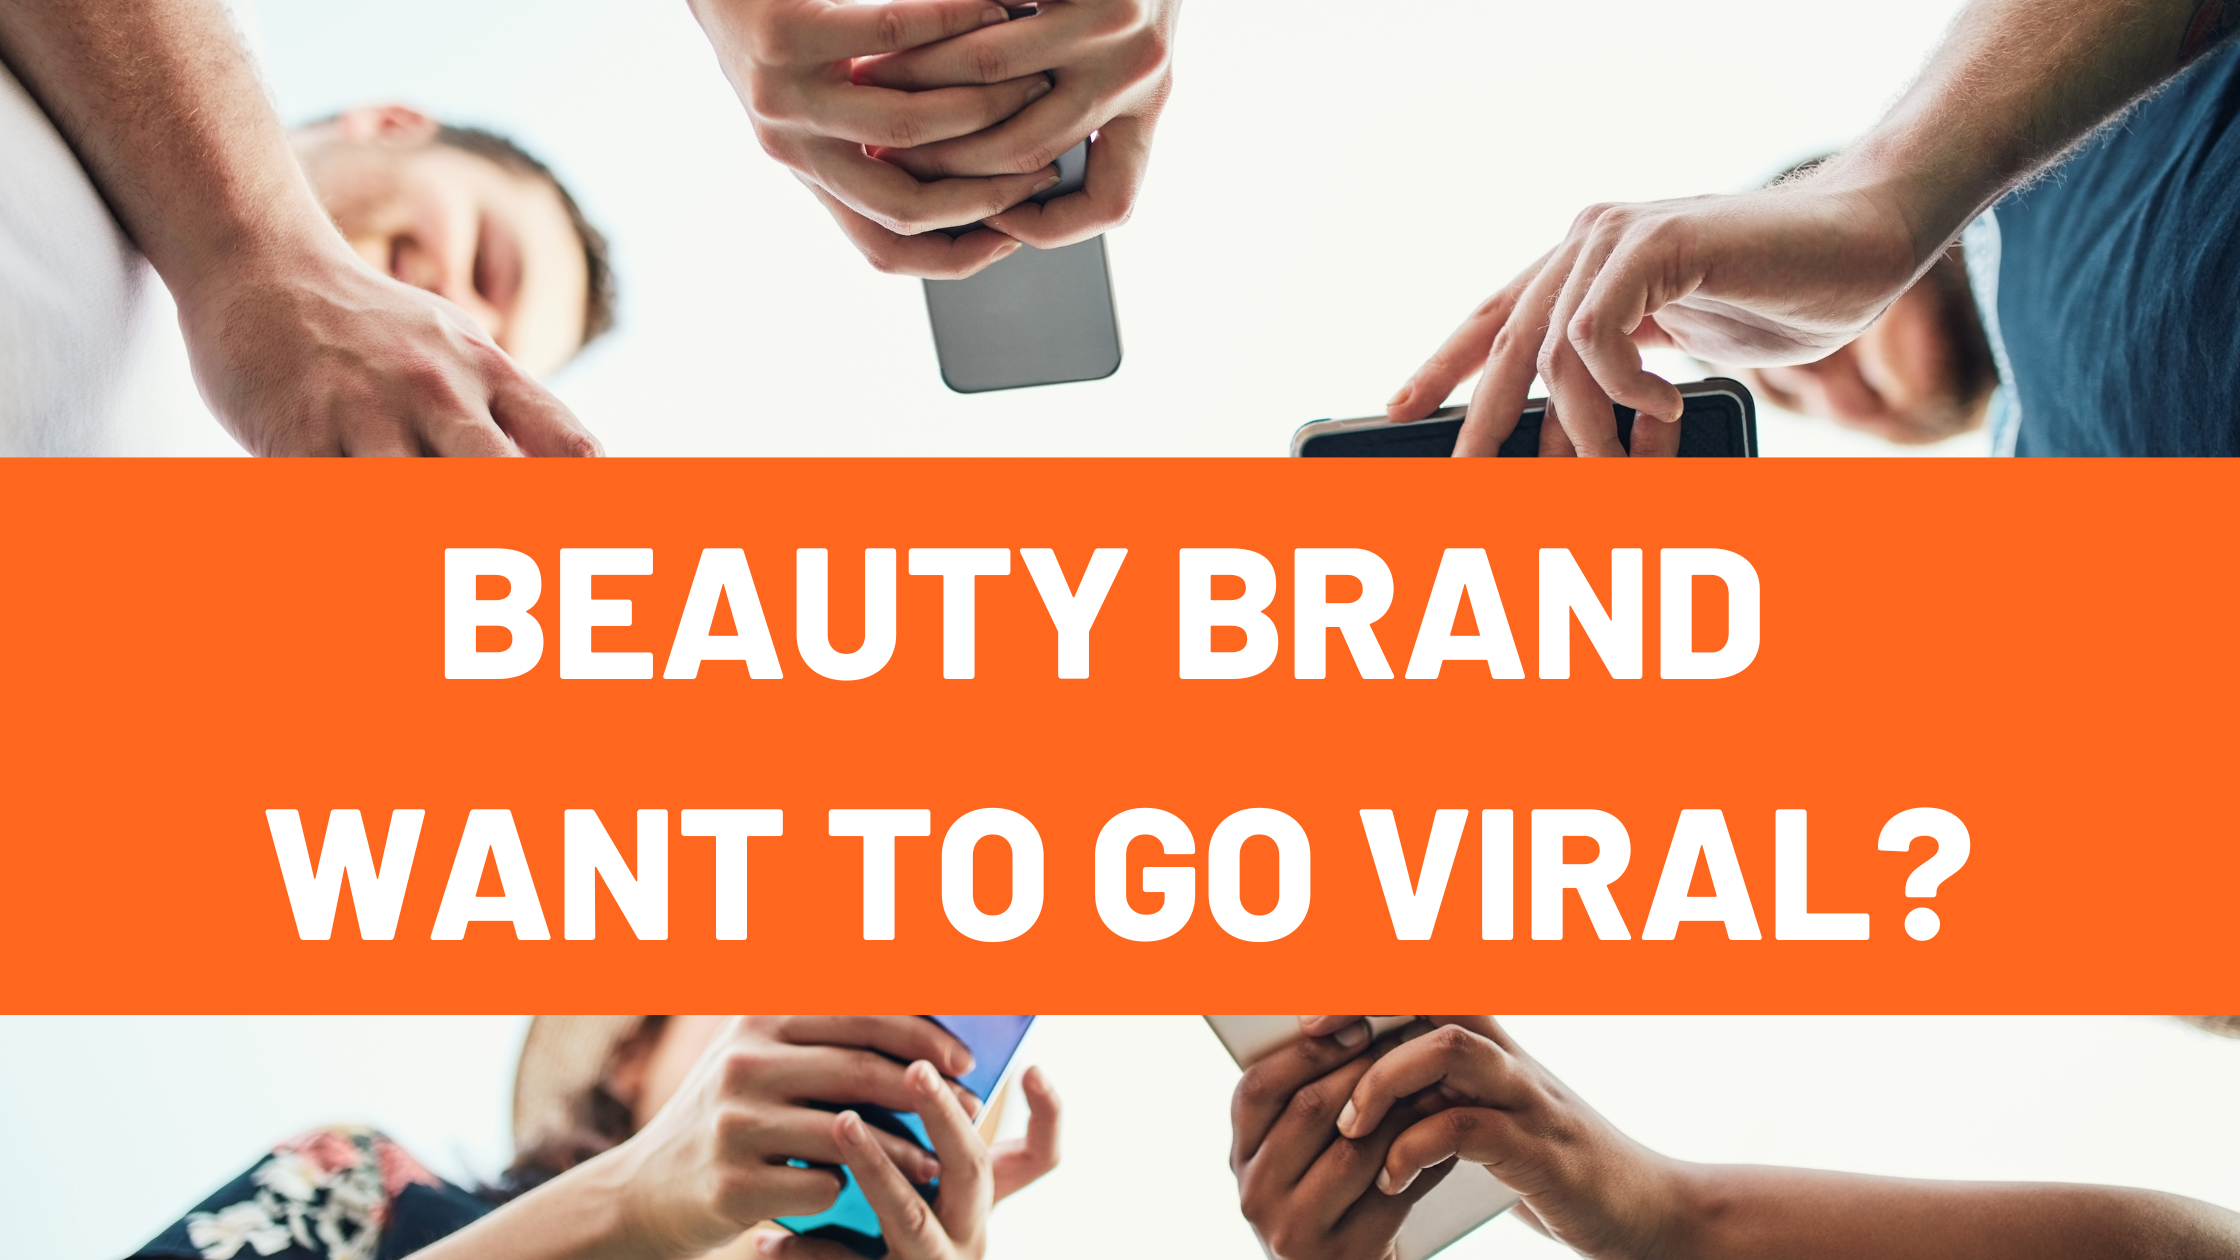 Beauty brand how to go viral or do word of mouth marketing?